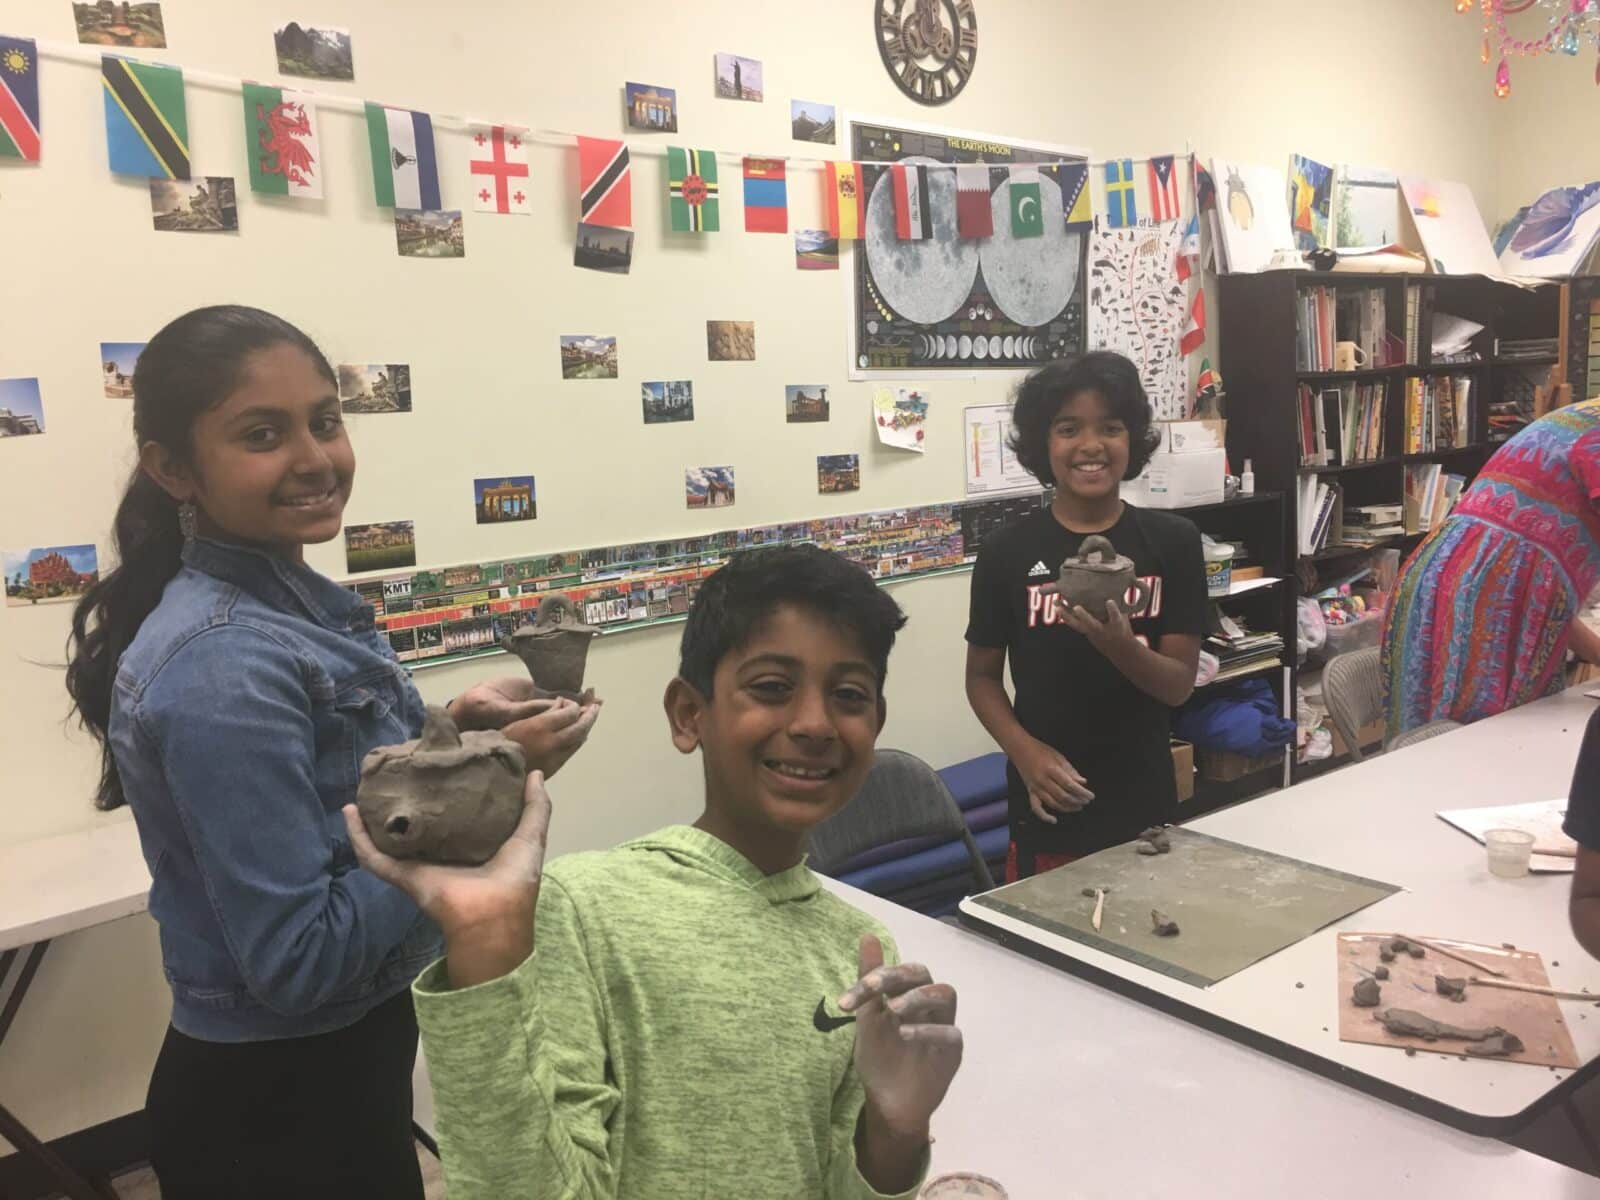 Three kids that are happy showing their clay crafts